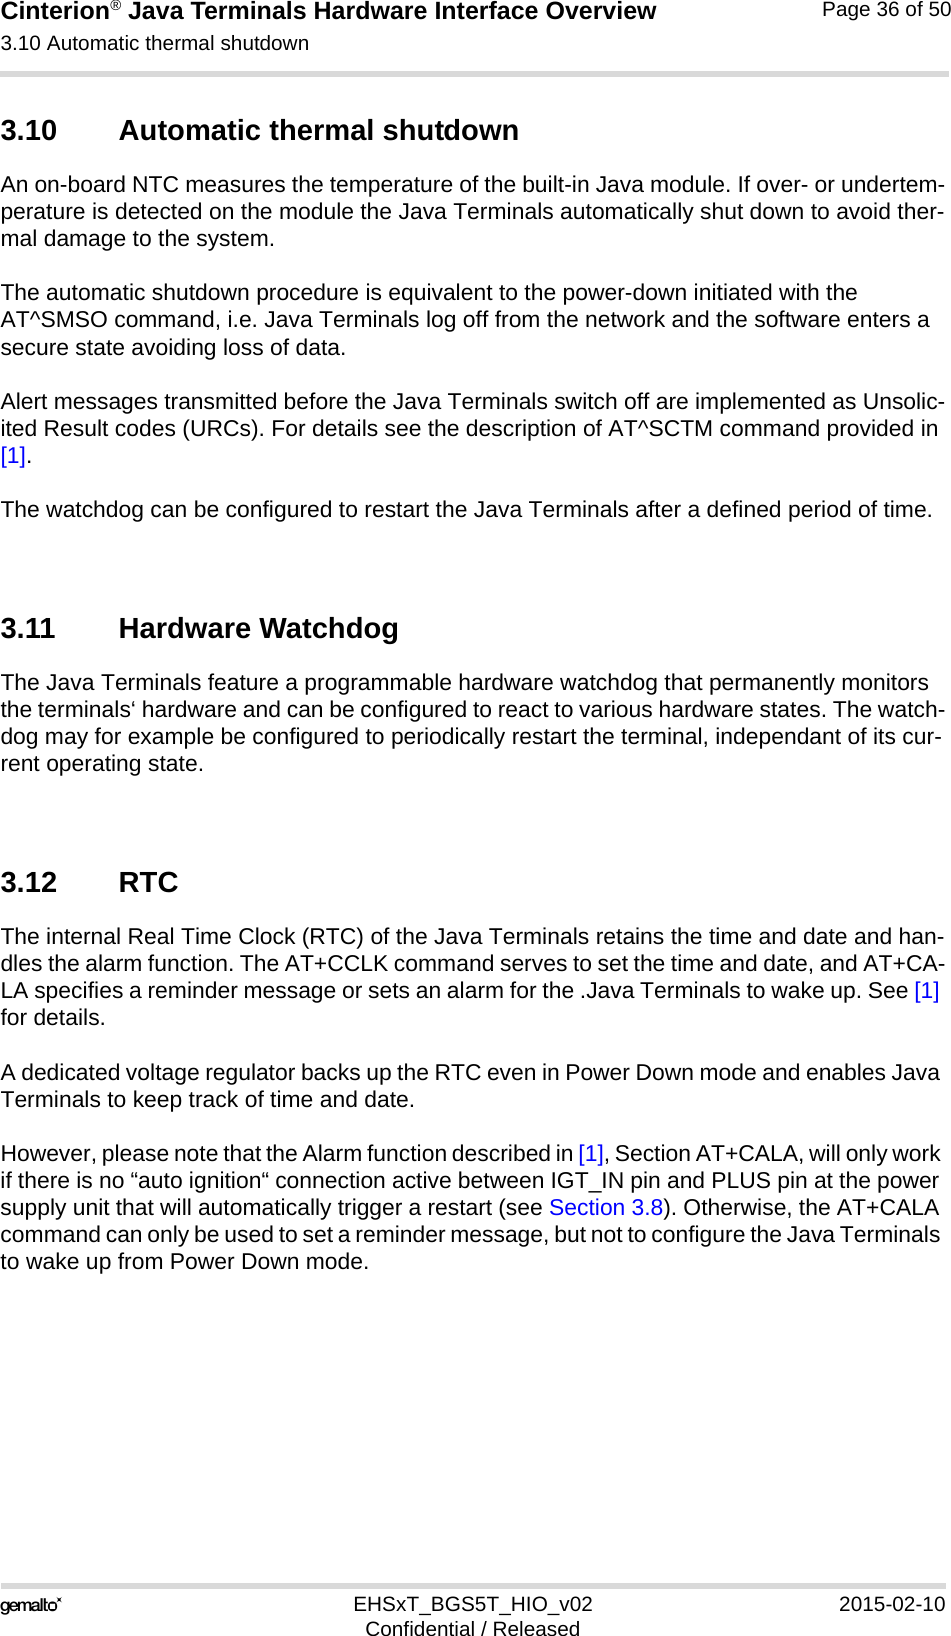 Cinterion® Java Terminals Hardware Interface Overview3.10 Automatic thermal shutdown39EHSxT_BGS5T_HIO_v02 2015-02-10Confidential / ReleasedPage 36 of 503.10 Automatic thermal shutdownAn on-board NTC measures the temperature of the built-in Java module. If over- or undertem-perature is detected on the module the Java Terminals automatically shut down to avoid ther-mal damage to the system. The automatic shutdown procedure is equivalent to the power-down initiated with the AT^SMSO command, i.e. Java Terminals log off from the network and the software enters a secure state avoiding loss of data.Alert messages transmitted before the Java Terminals switch off are implemented as Unsolic-ited Result codes (URCs). For details see the description of AT^SCTM command provided in [1]. The watchdog can be configured to restart the Java Terminals after a defined period of time.3.11 Hardware WatchdogThe Java Terminals feature a programmable hardware watchdog that permanently monitors the terminals‘ hardware and can be configured to react to various hardware states. The watch-dog may for example be configured to periodically restart the terminal, independant of its cur-rent operating state. 3.12 RTCThe internal Real Time Clock (RTC) of the Java Terminals retains the time and date and han-dles the alarm function. The AT+CCLK command serves to set the time and date, and AT+CA-LA specifies a reminder message or sets an alarm for the .Java Terminals to wake up. See [1] for details. A dedicated voltage regulator backs up the RTC even in Power Down mode and enables Java Terminals to keep track of time and date. However, please note that the Alarm function described in [1], Section AT+CALA, will only work if there is no “auto ignition“ connection active between IGT_IN pin and PLUS pin at the power supply unit that will automatically trigger a restart (see Section 3.8). Otherwise, the AT+CALA command can only be used to set a reminder message, but not to configure the Java Terminals to wake up from Power Down mode. 